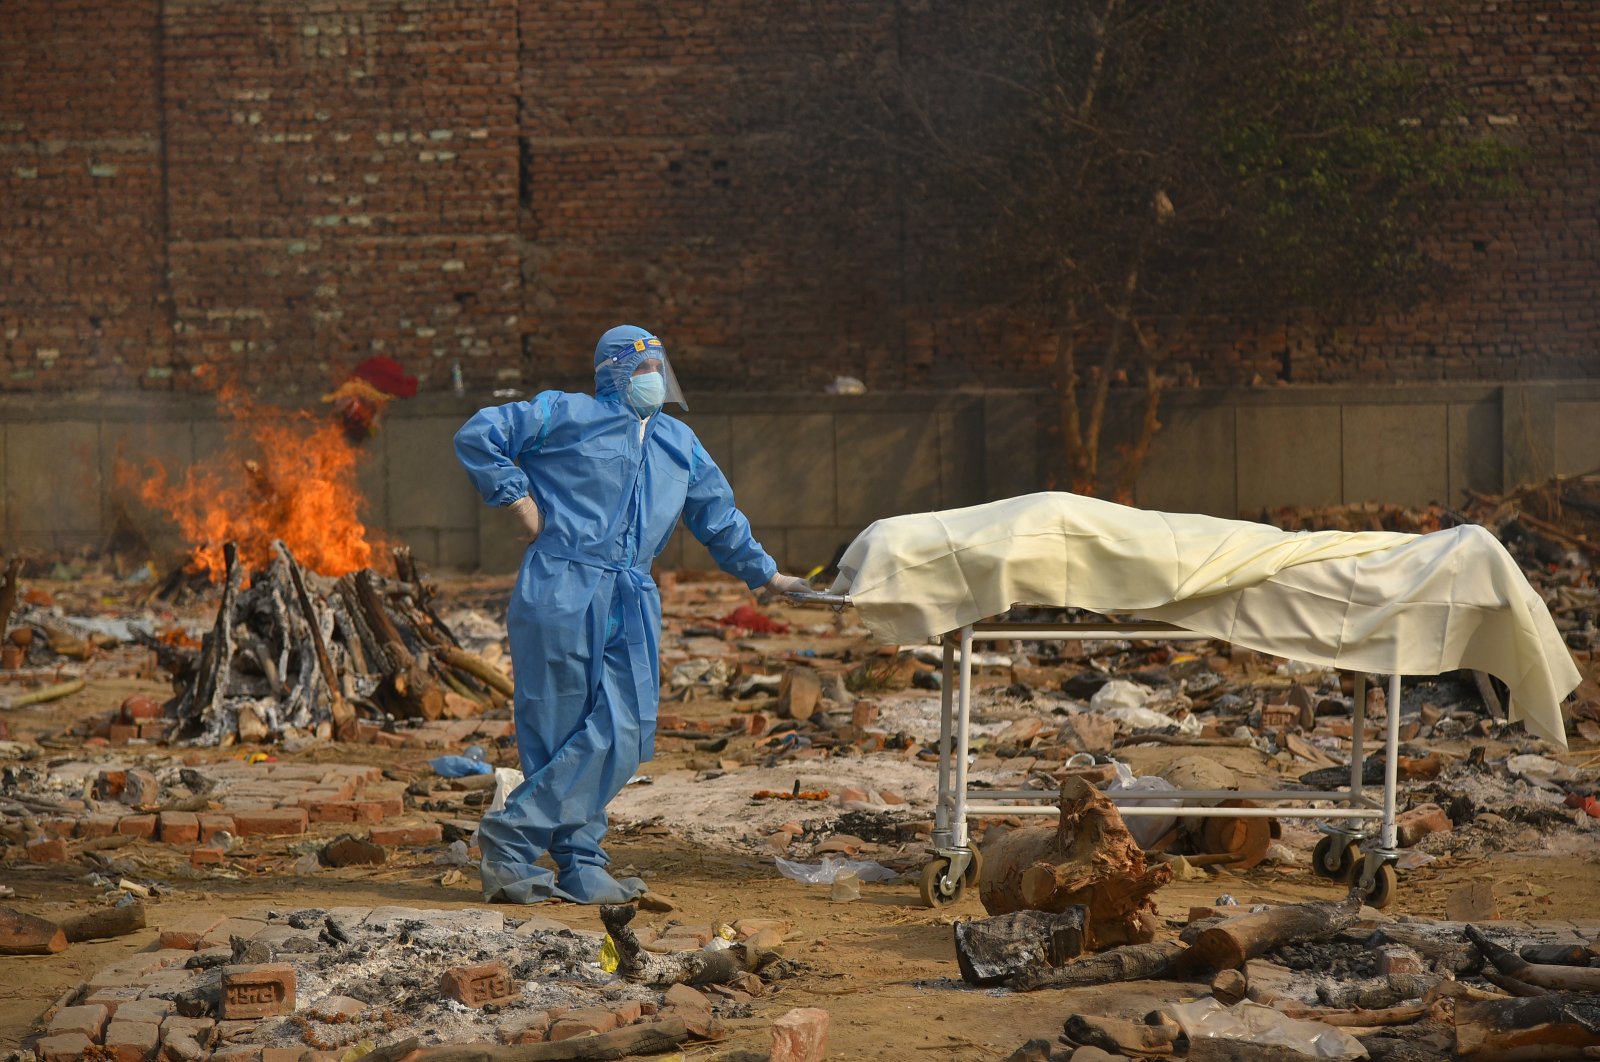 A family member wearing personal protective equipment (PPE) waits to perform the last rites for a COVID-19 victim at a cremation ground in New Delhi, India, April 29, 2021. (EPA Photo)